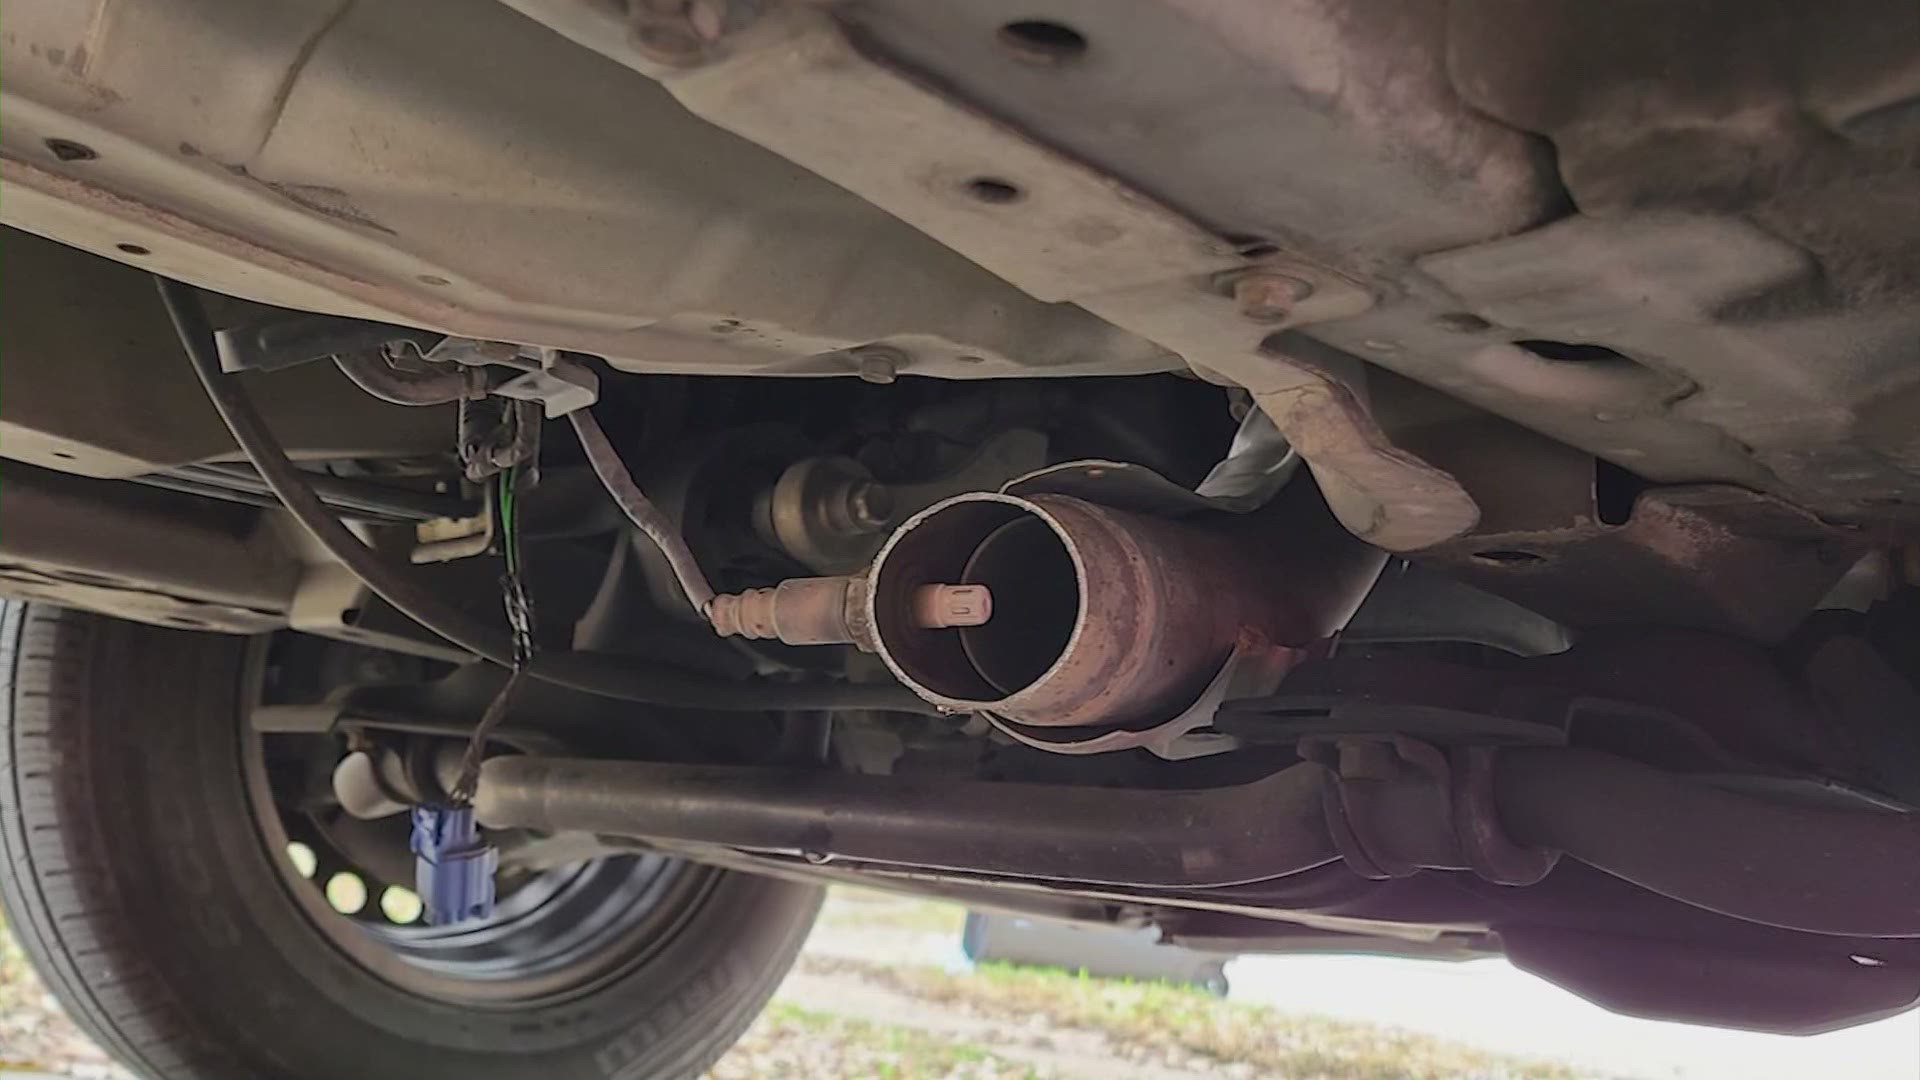 How to stop or deter catalytic converter theft: tips from police 